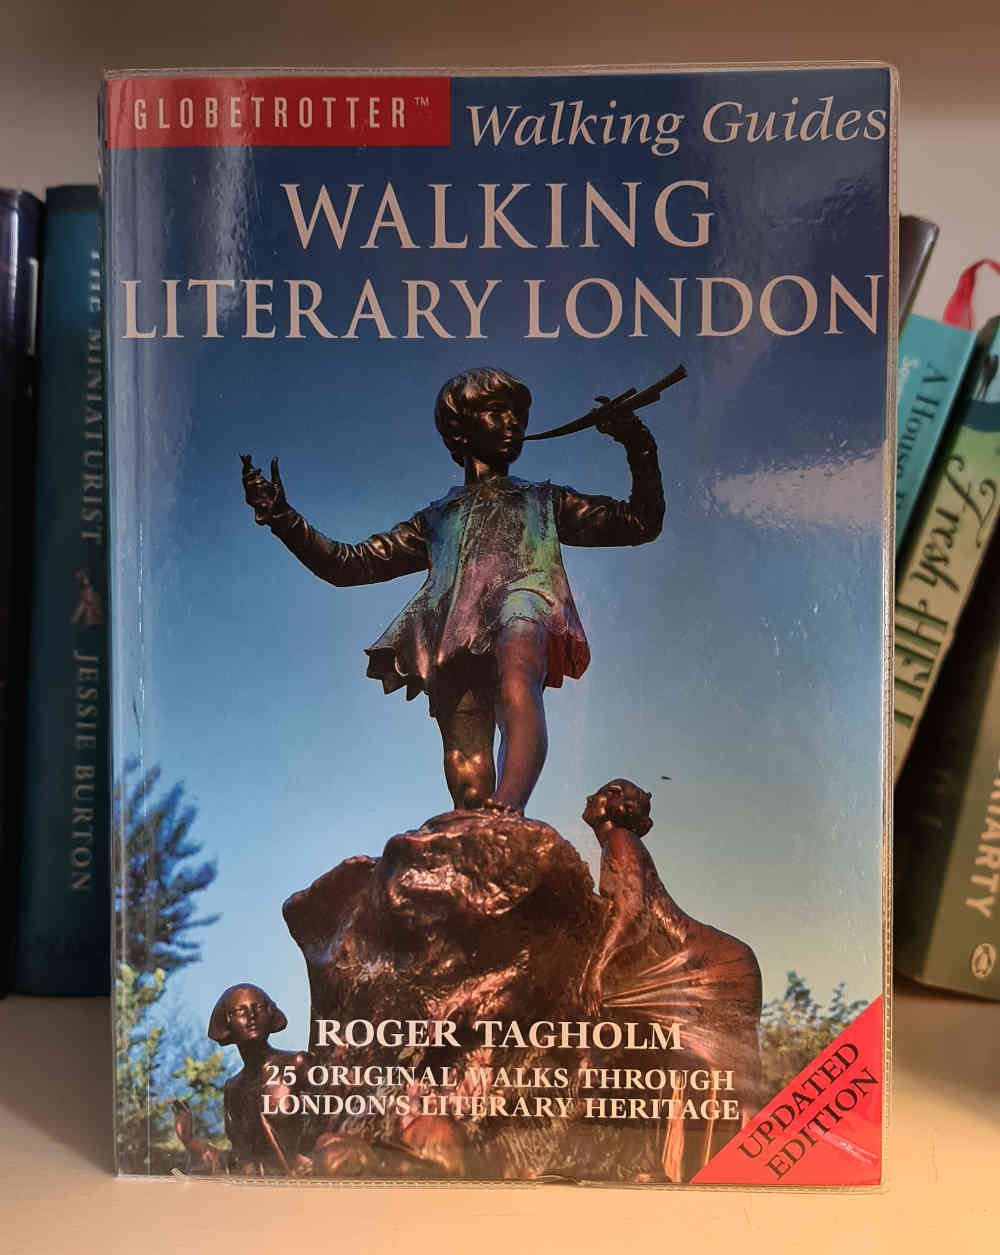 London literary guide, history of London books